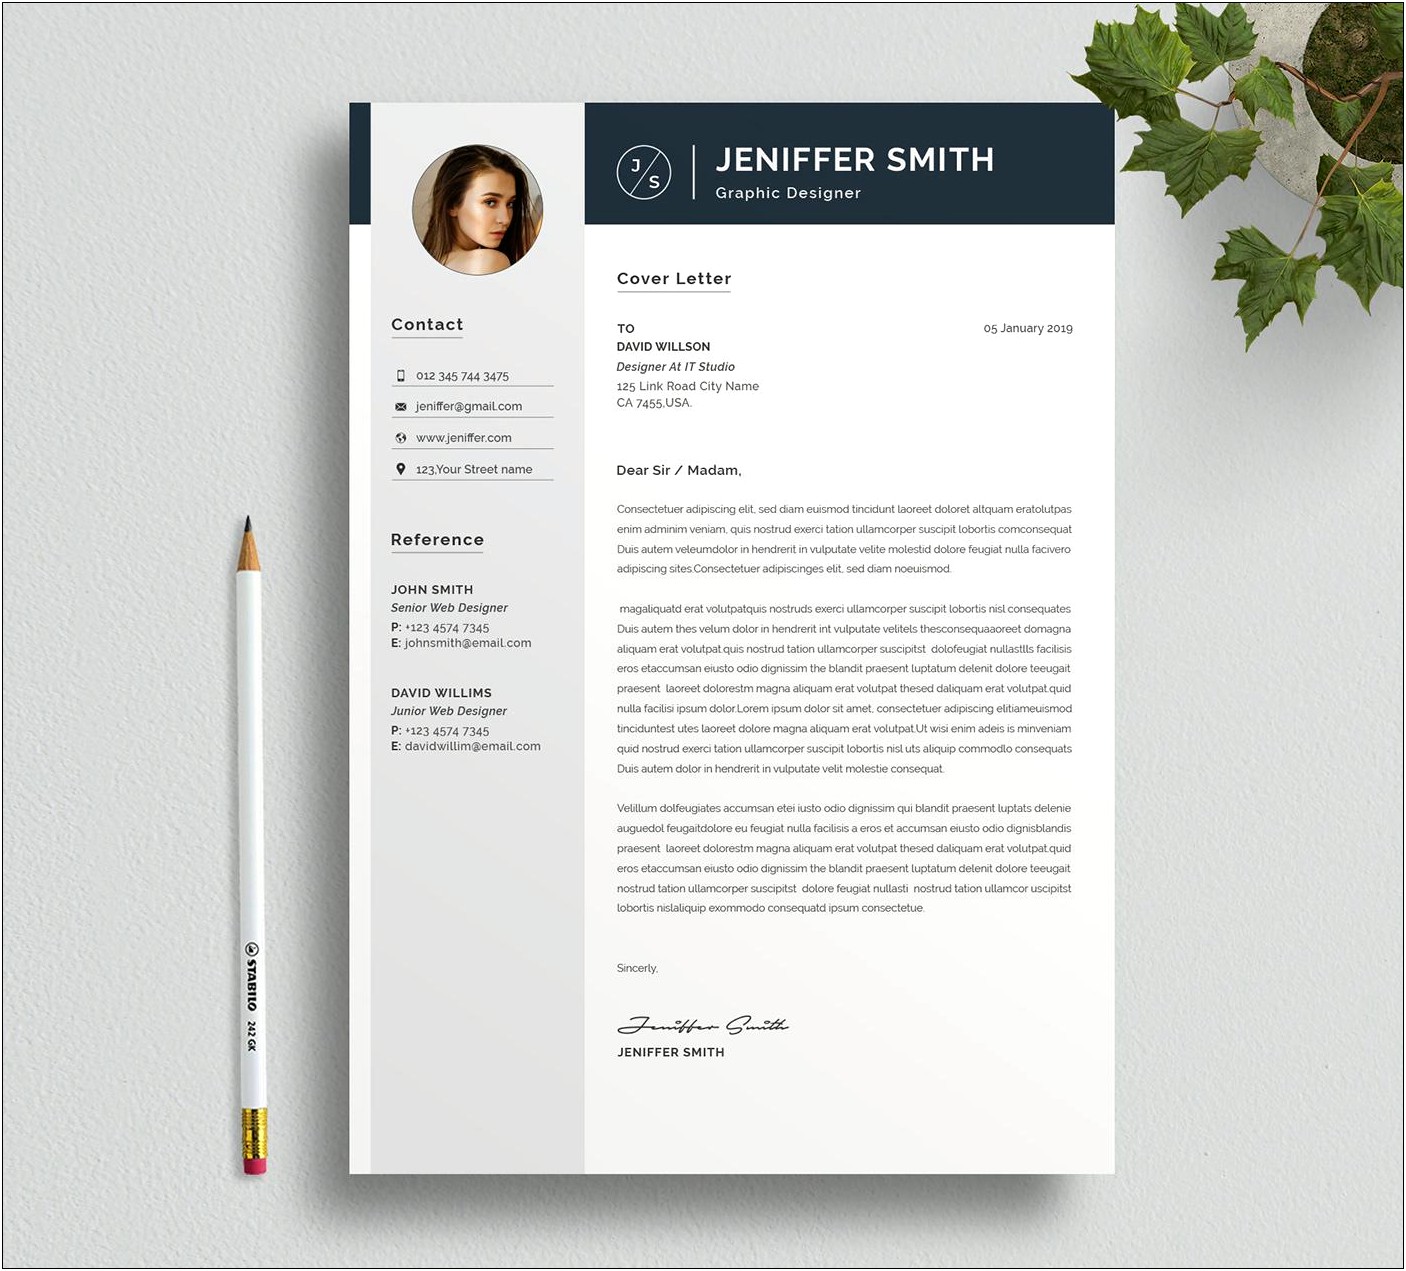 Indesign Resume Template 2019 Free